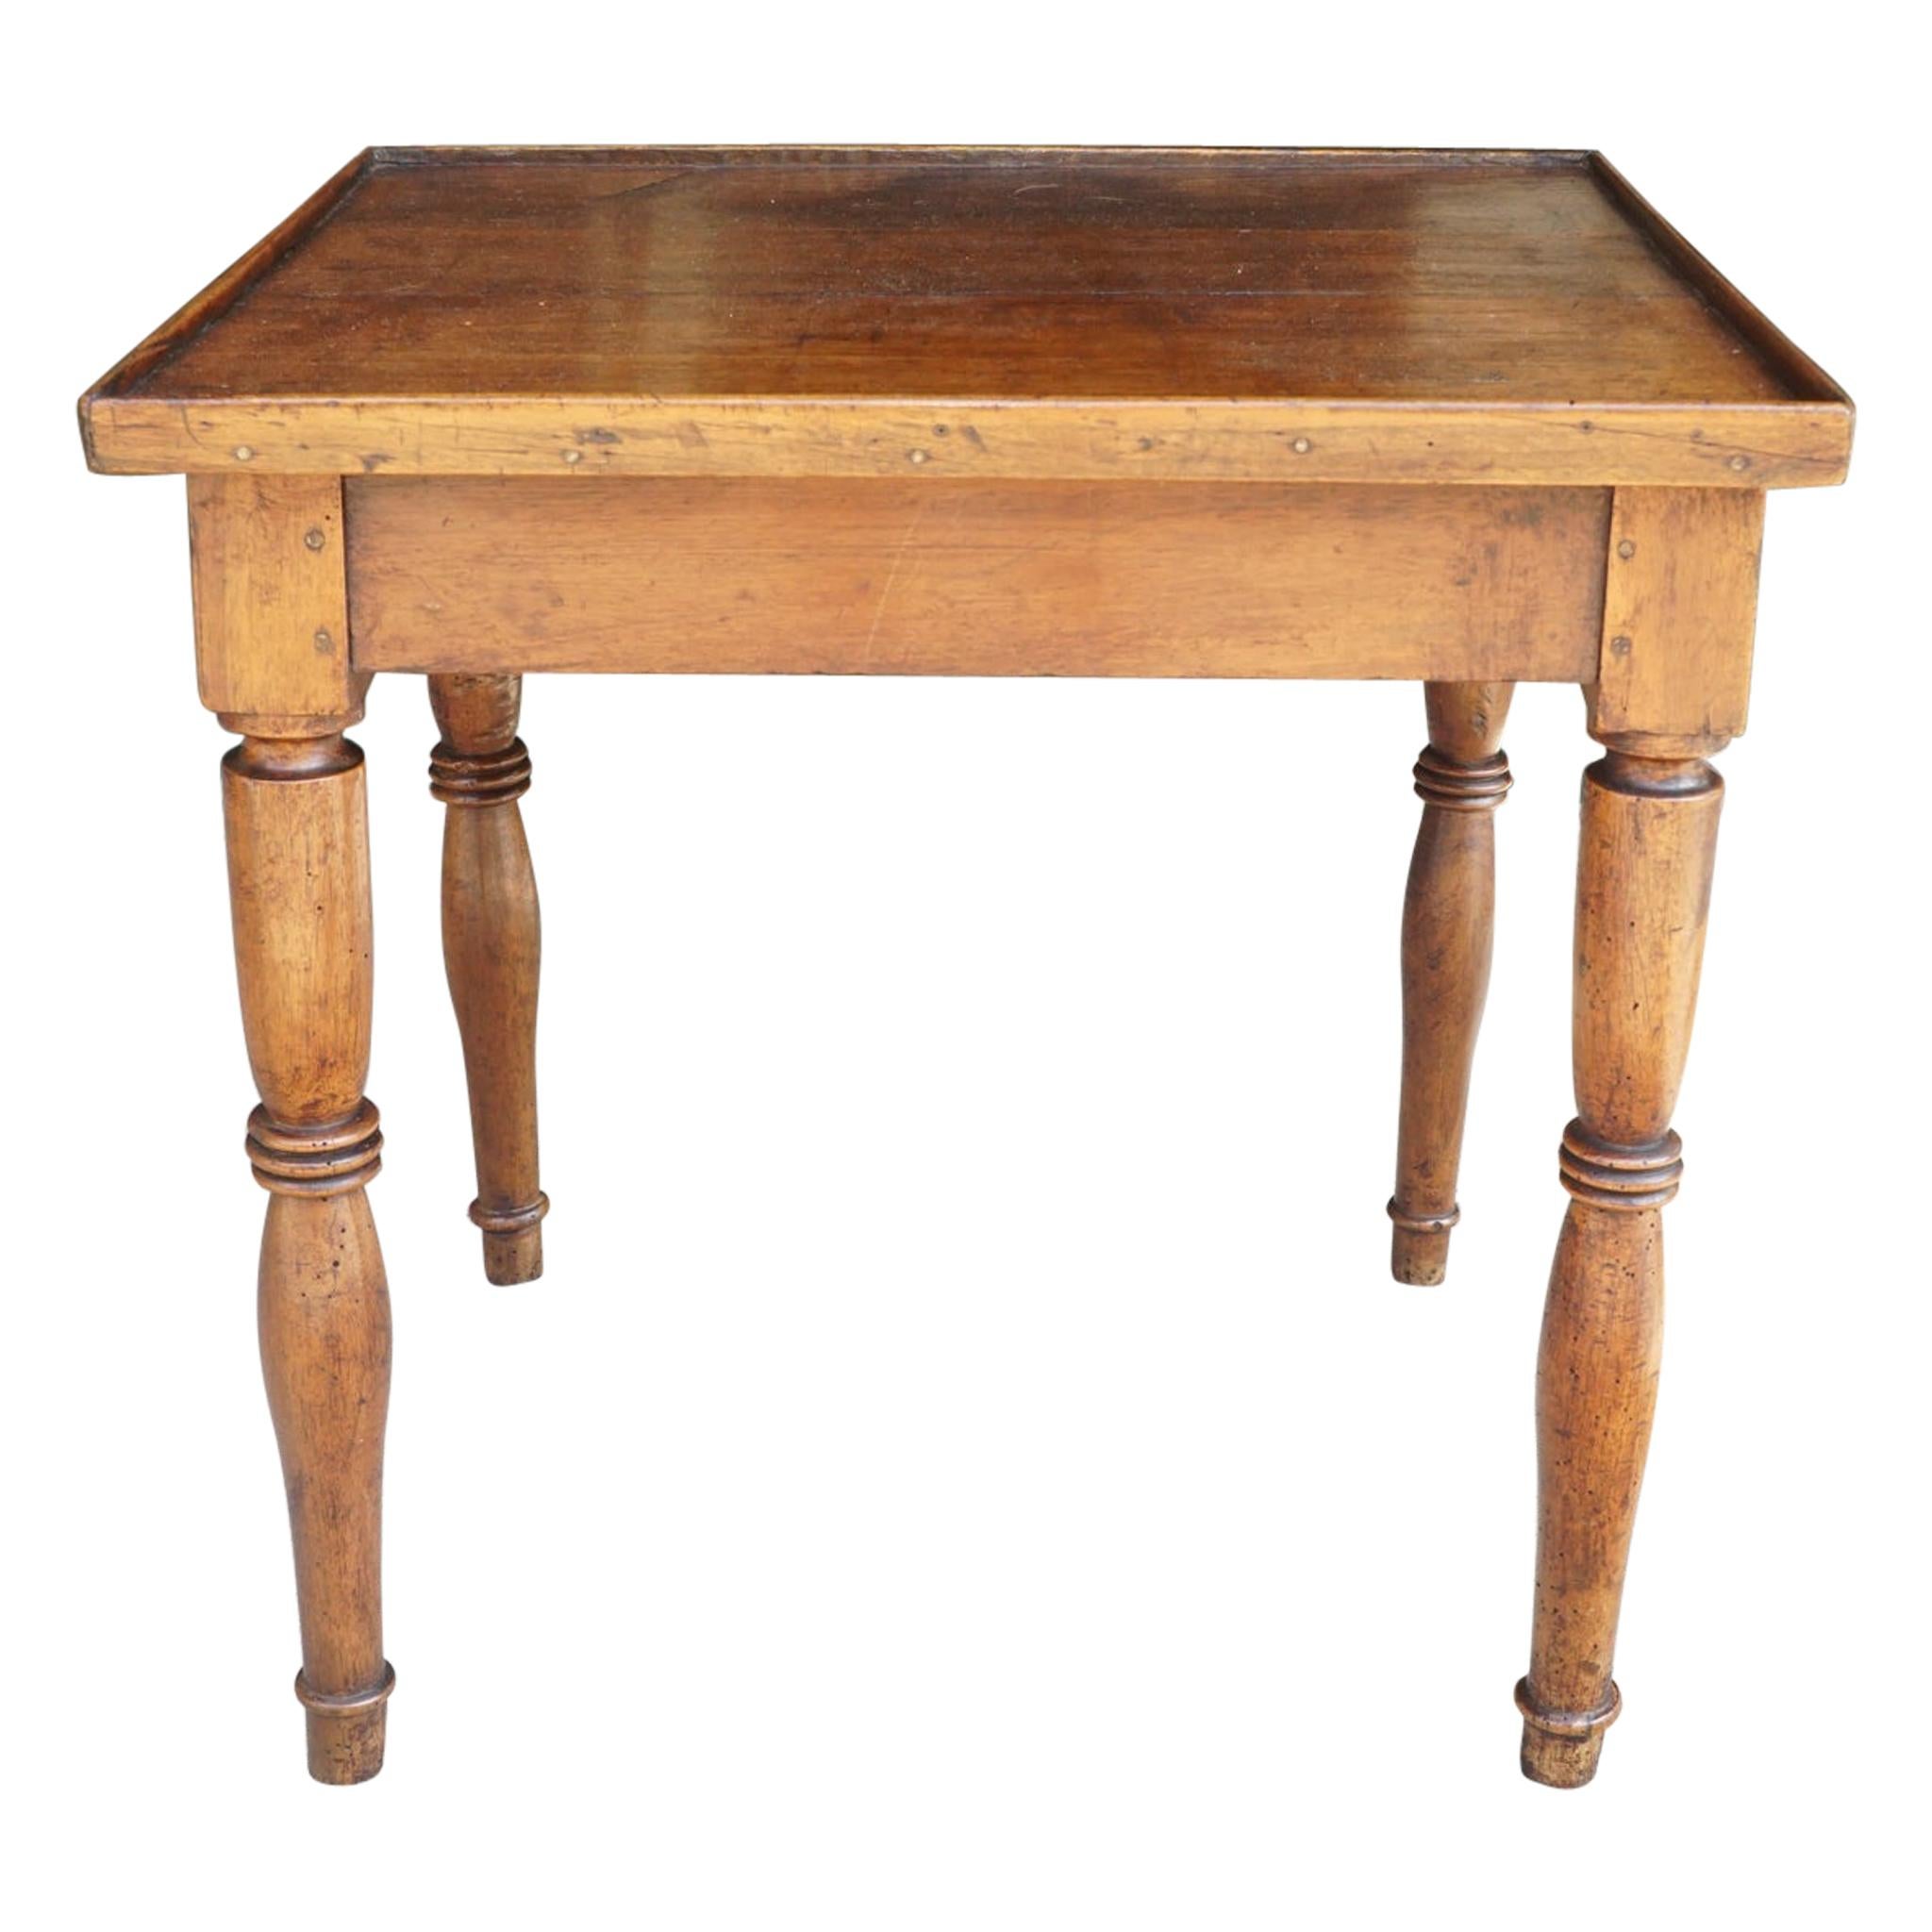 Period Small Country French Table in Walnut